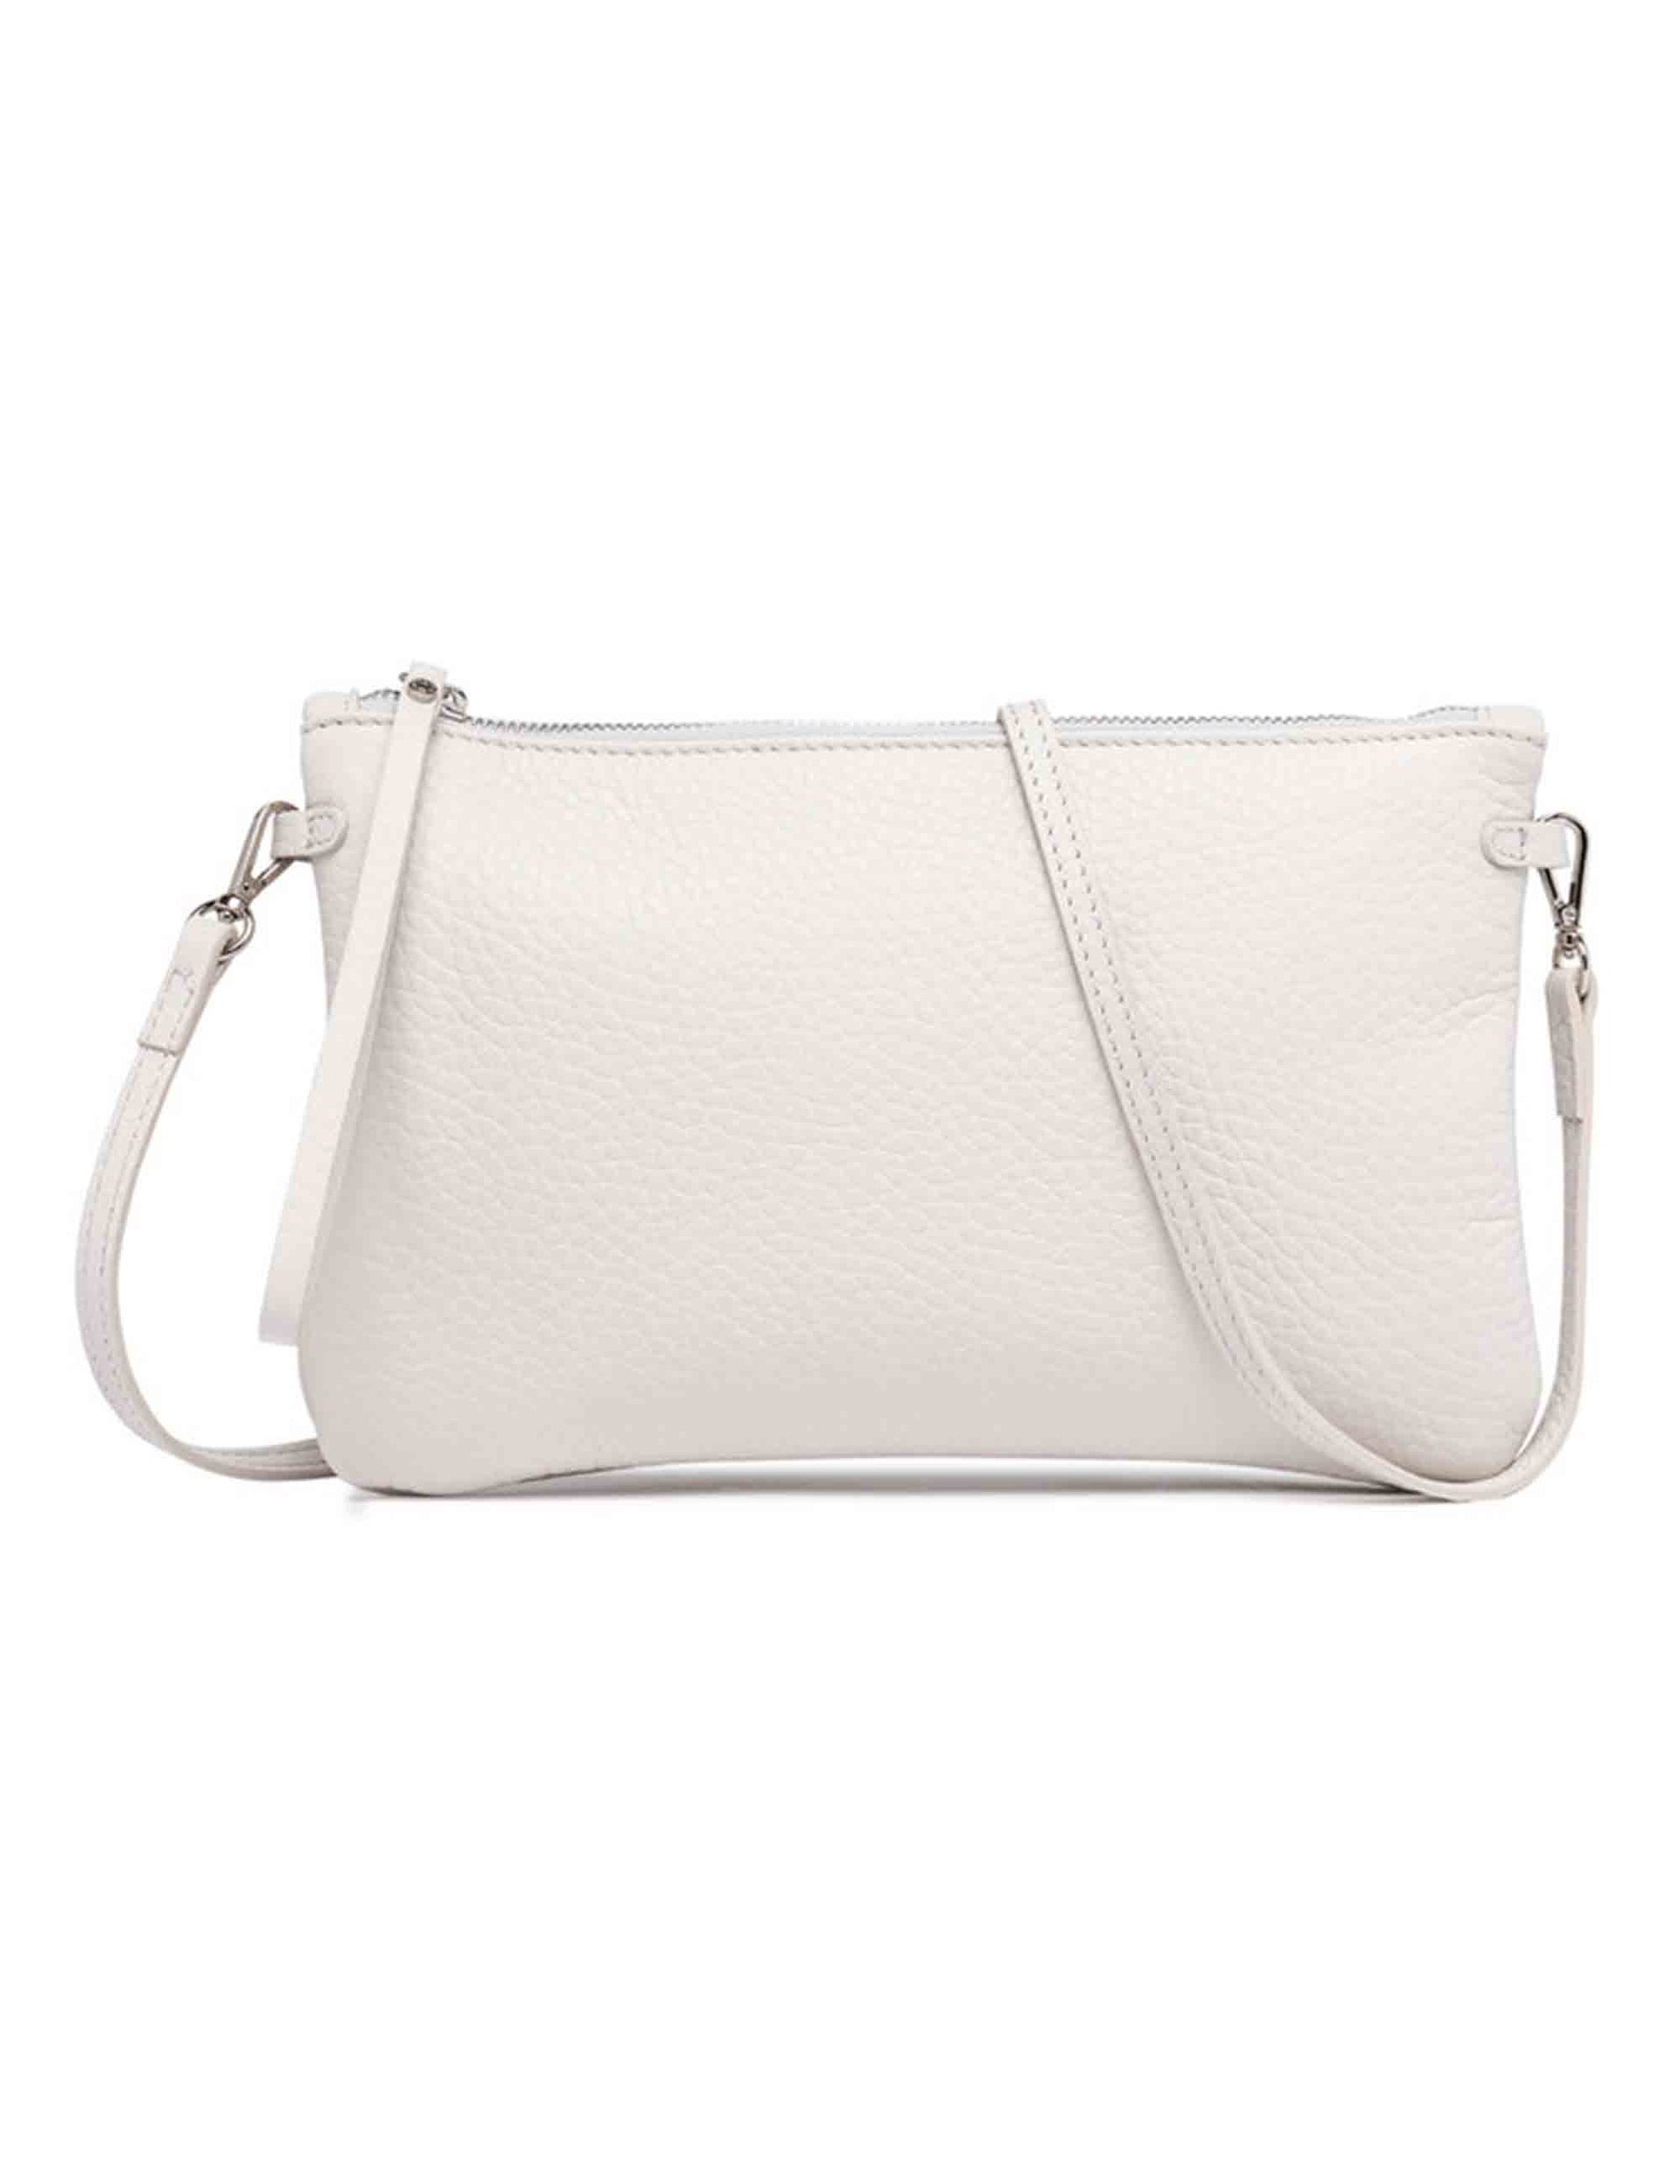 Hermy women's clutch bags in cream and natural leather with bracelet handle and shoulder strap